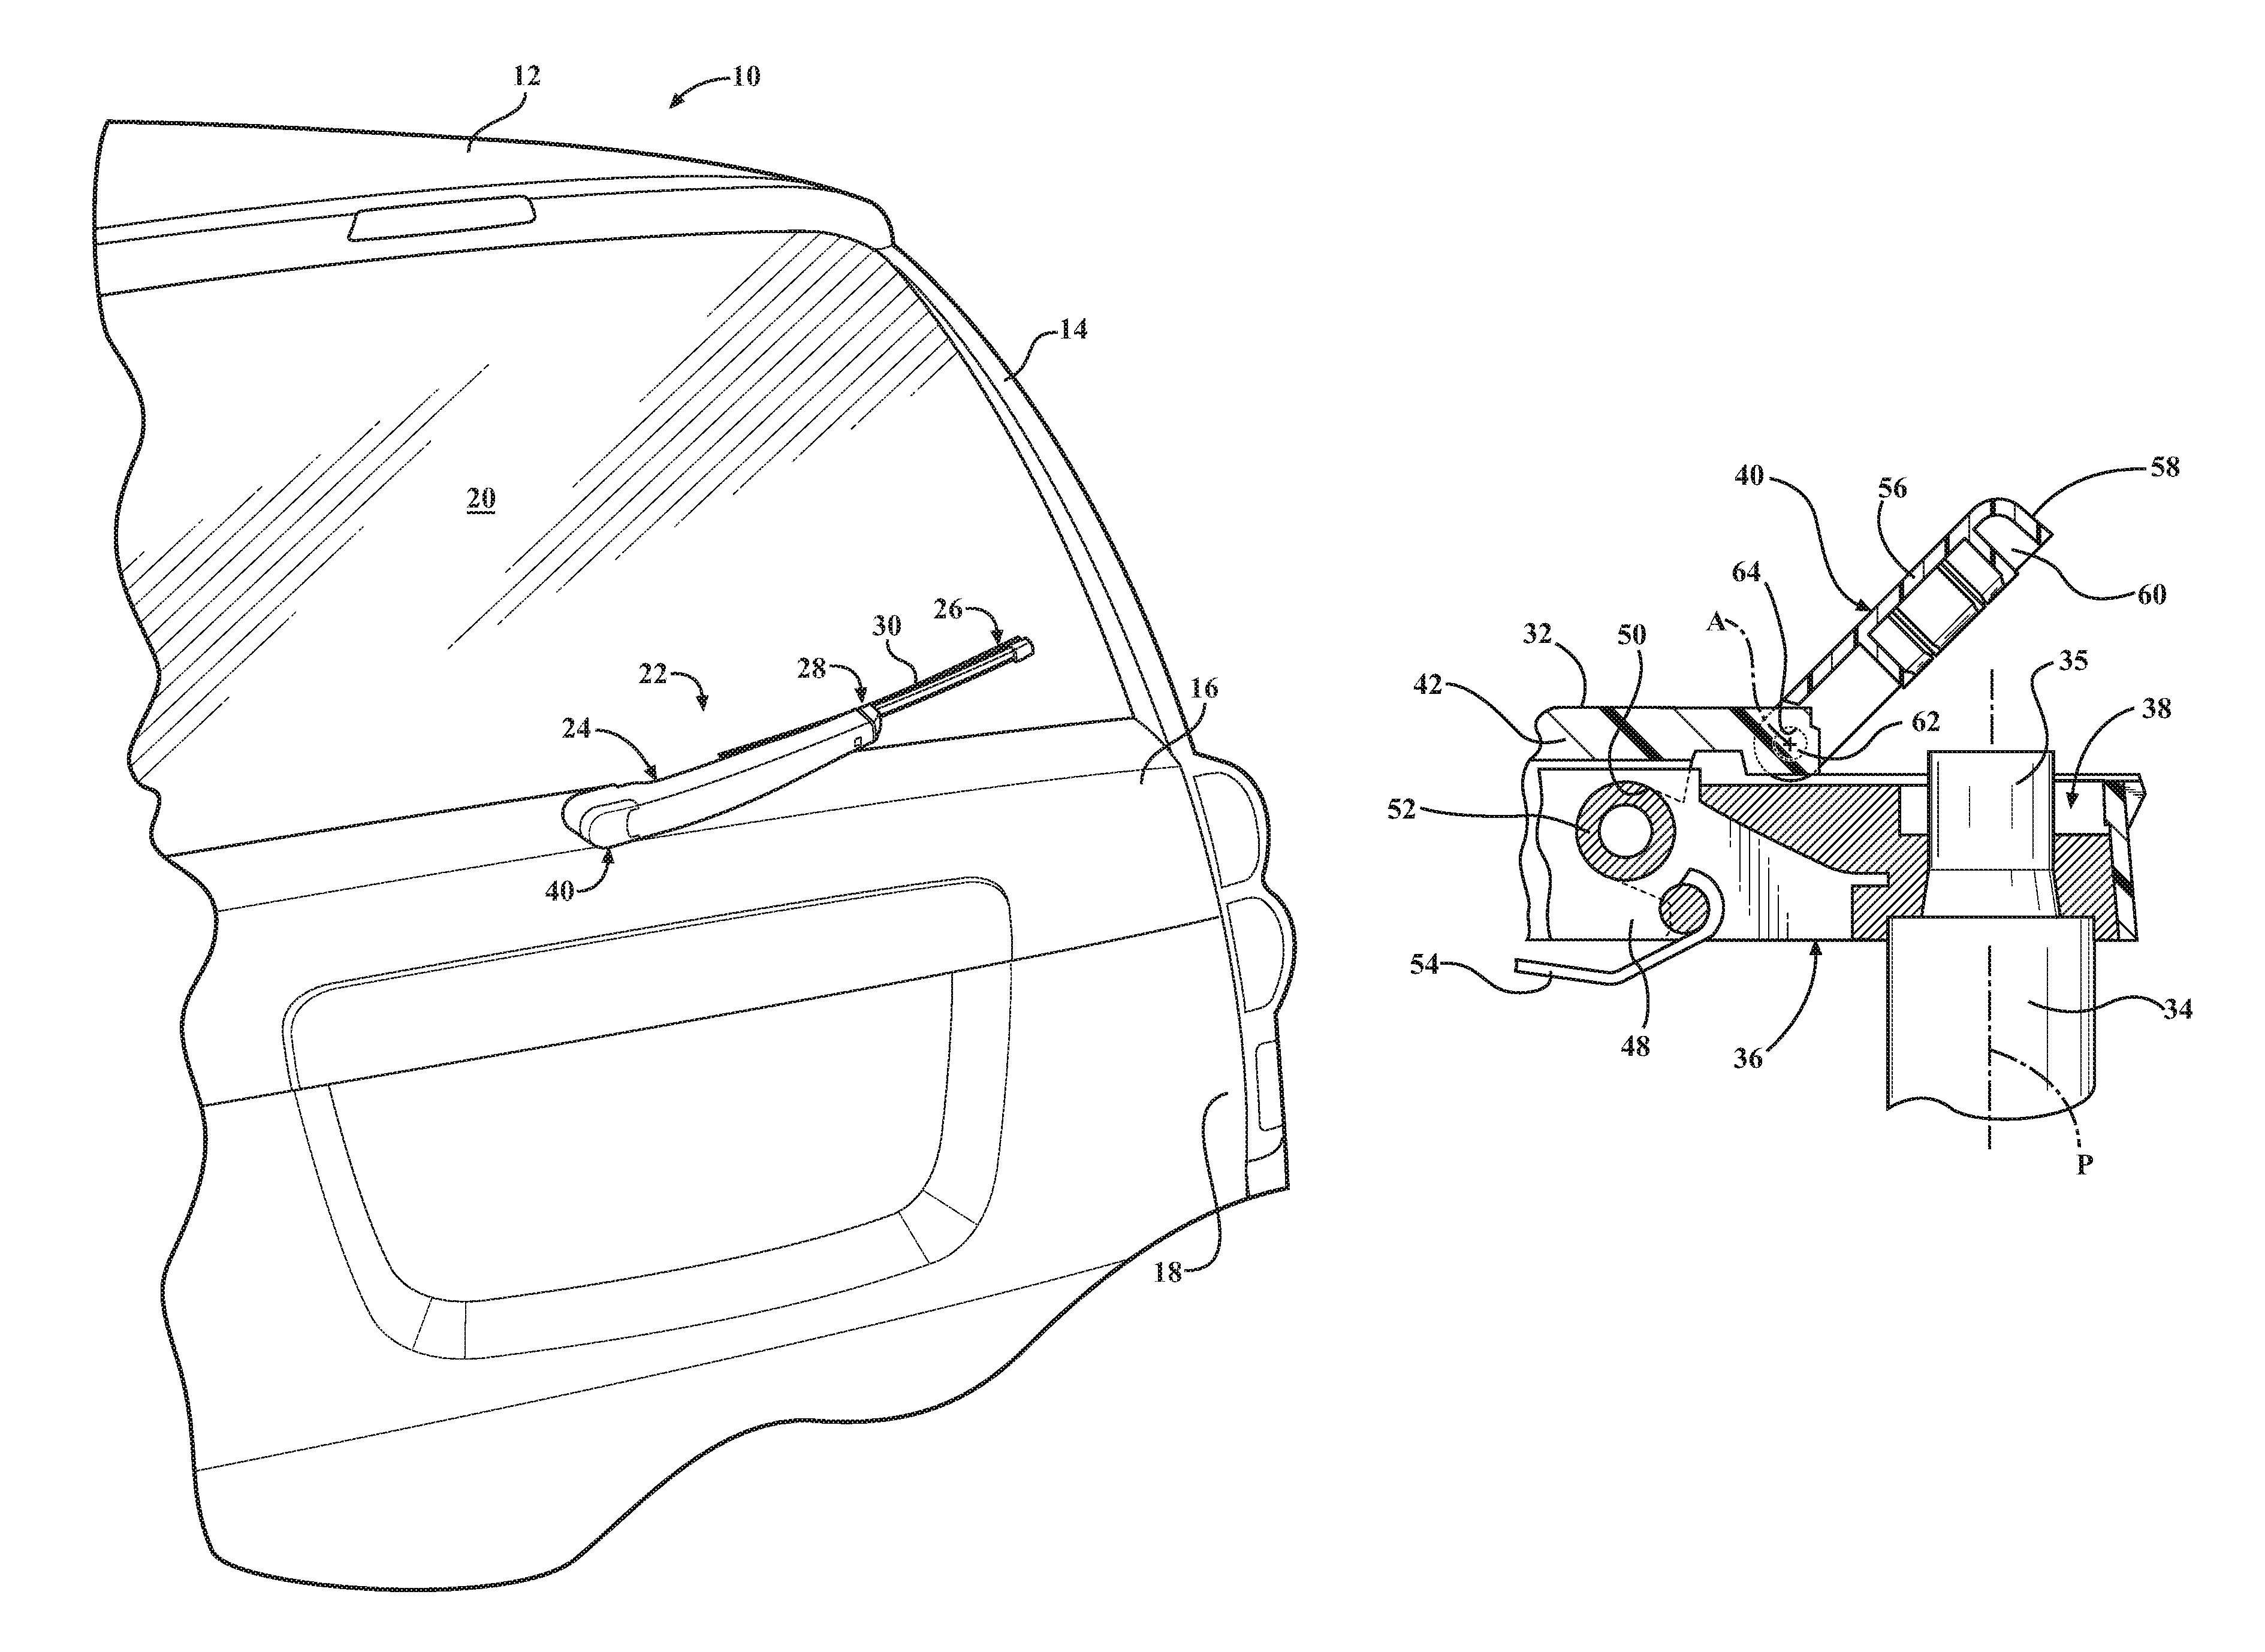 Wiper arm assembly having pivotal cover allowing access to pivot shaft